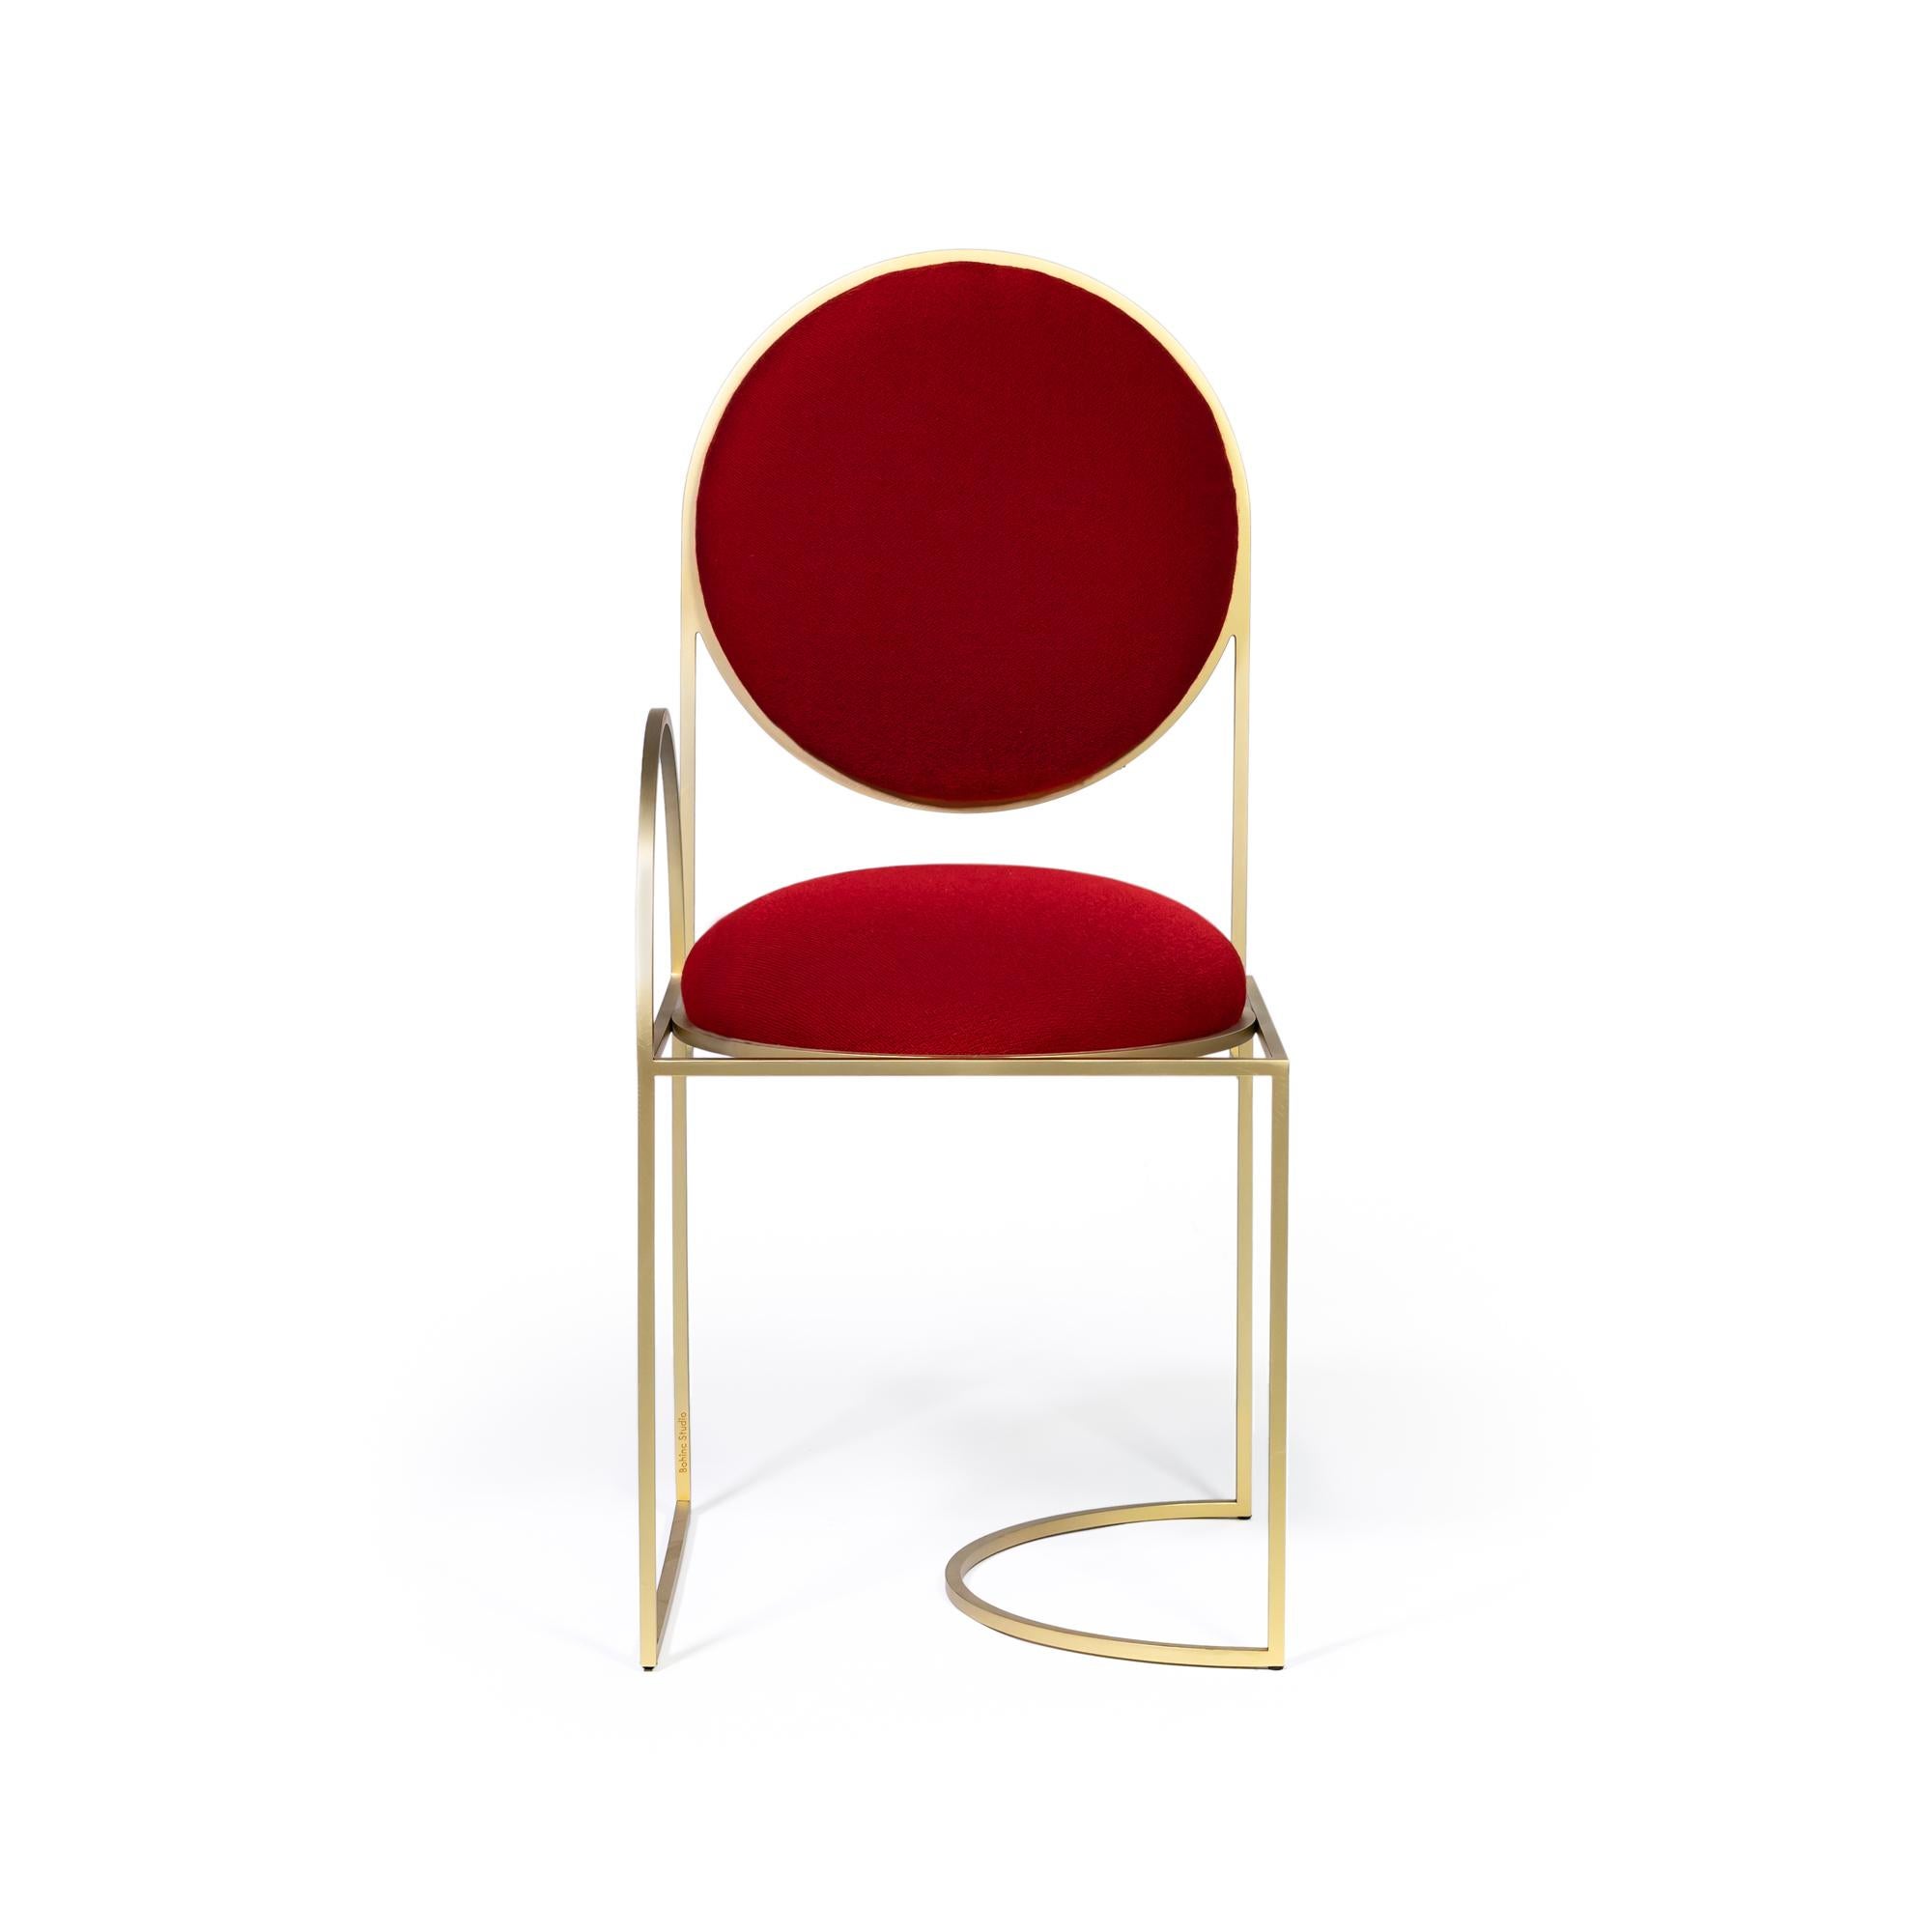 This is the first time that Bohinc explores a design favourite; the chair.

In the collection, Lara Bohinc develops her stellar themes, finding inspiration in planetary and lunar orbits, whose gravitationally curved trajectories drive the lines